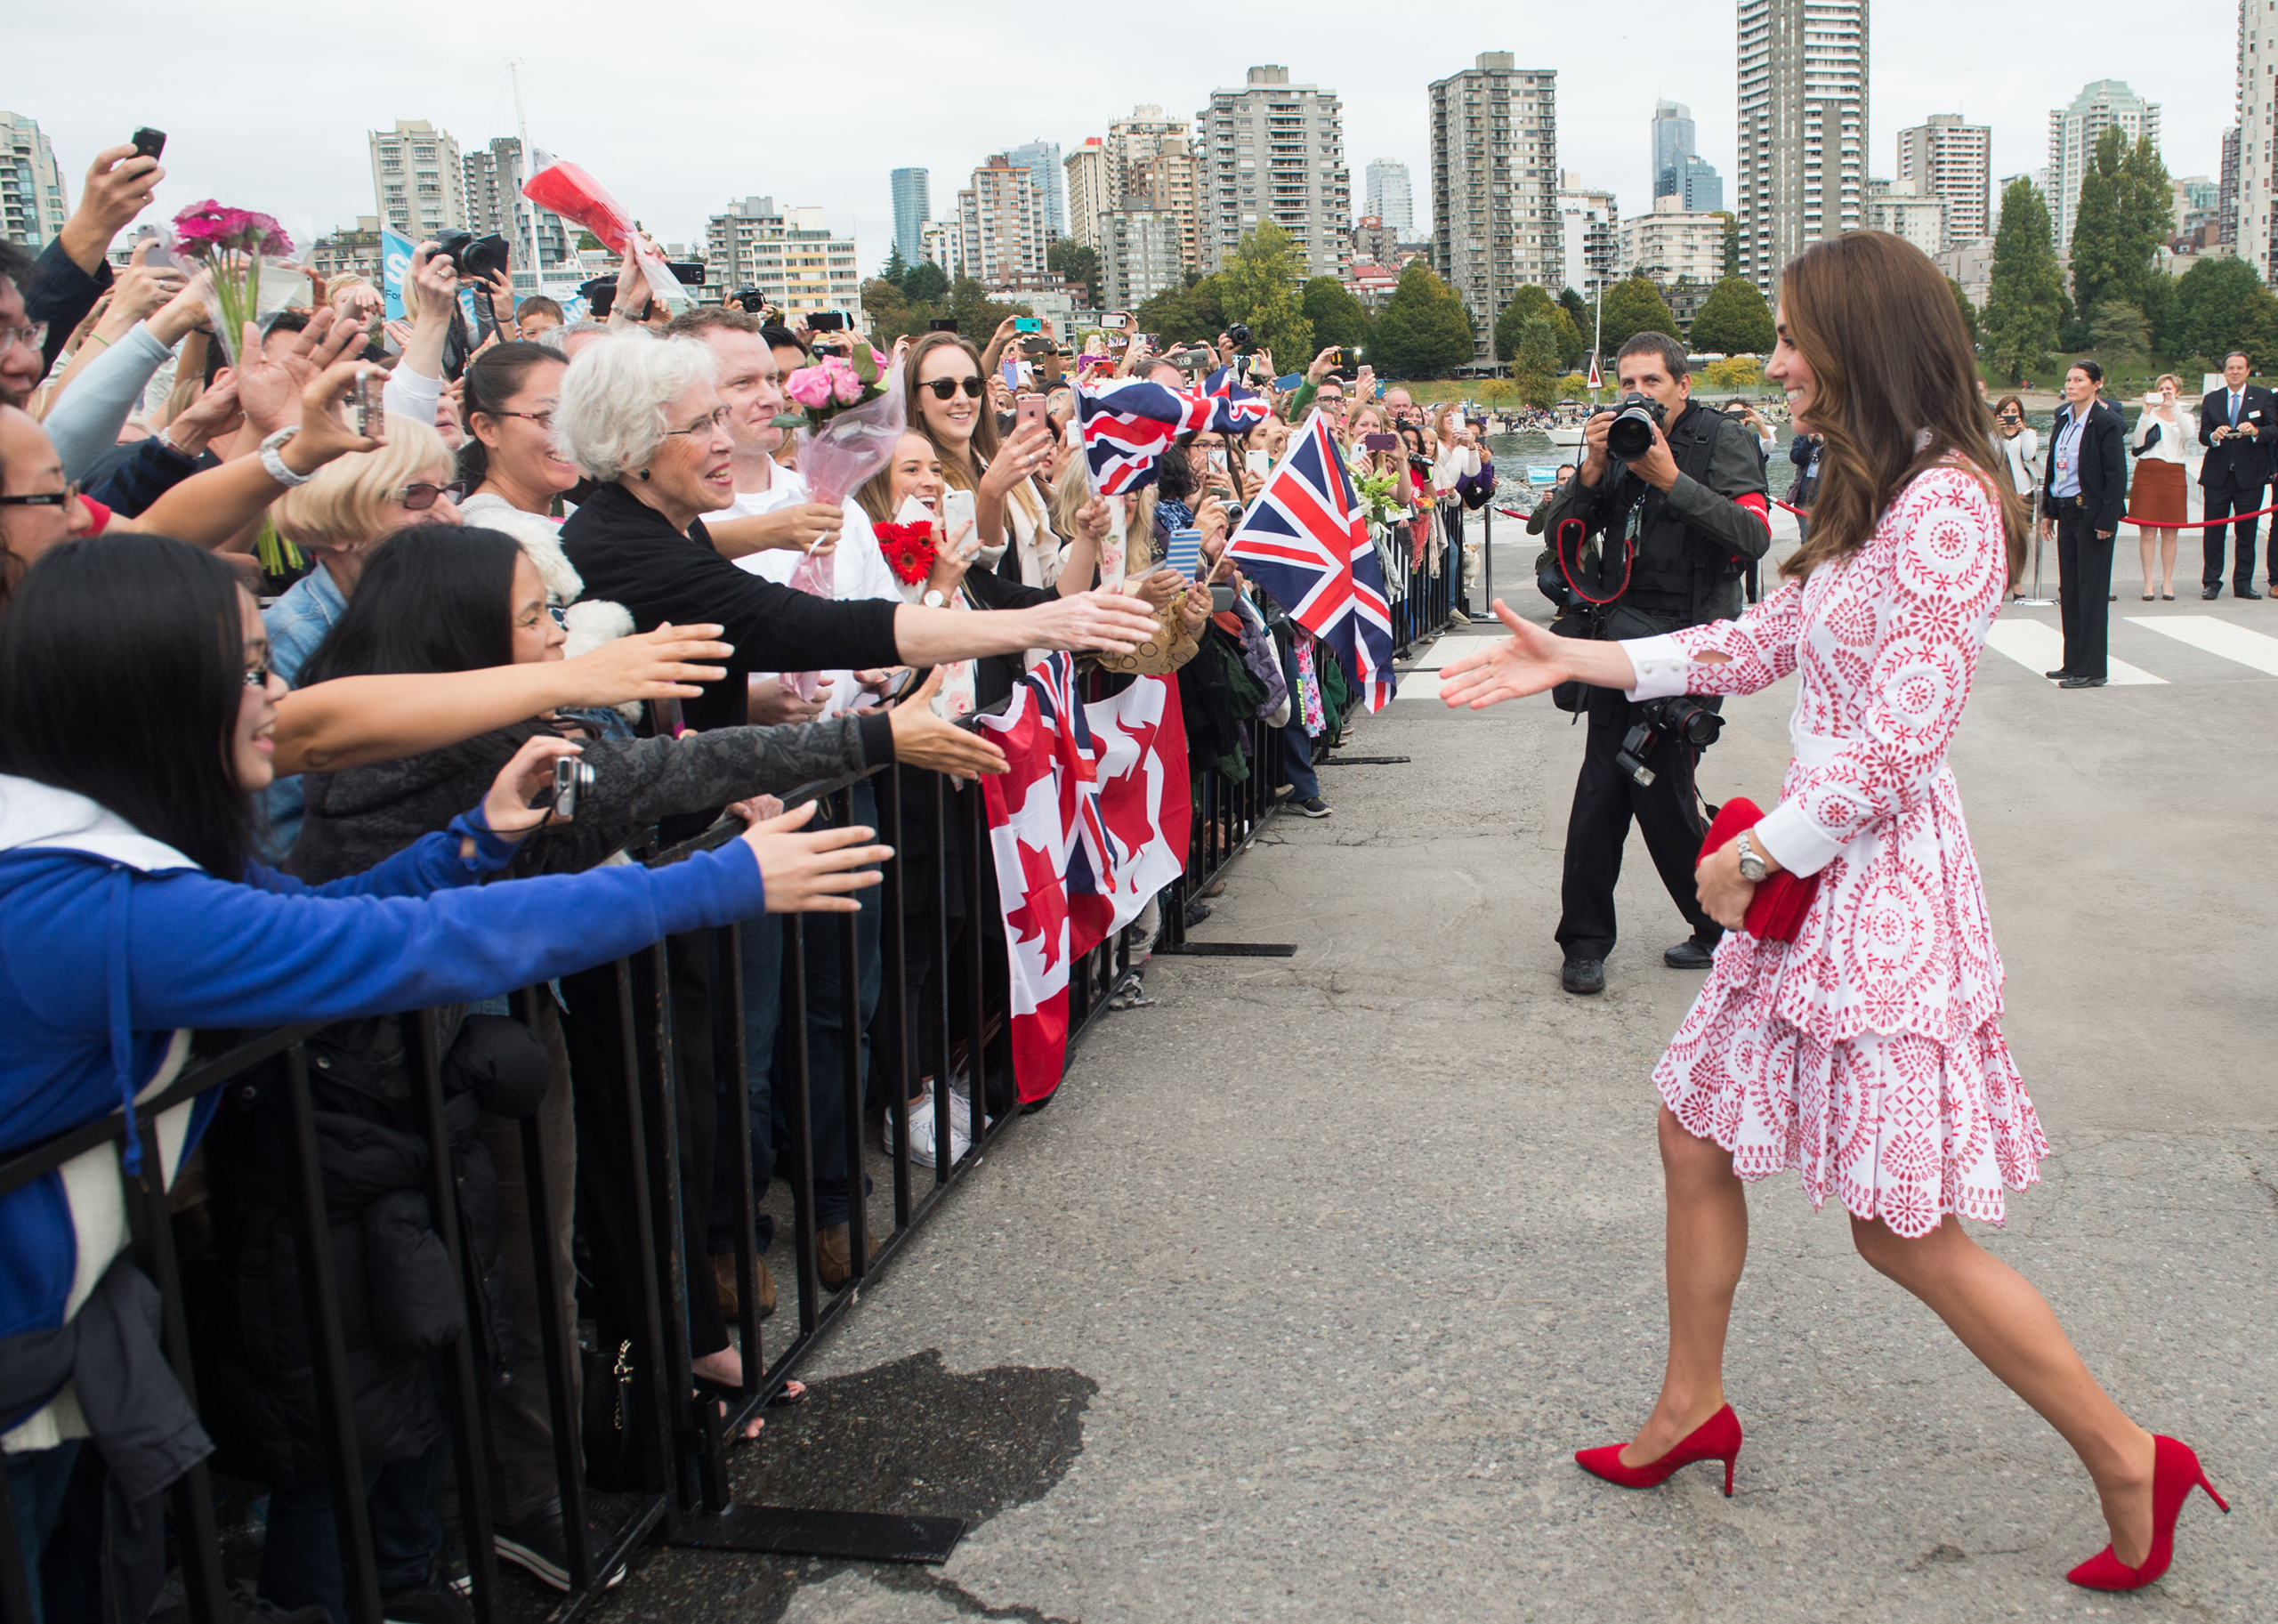 Catherine, Duchess of Cambridge, meets well wishers as visits the Canadian Coast Guard and Vancouver First Responders event at Kitsilano Coast Guard Station in Vancouver, Canada, on Sept. 25, 2016.